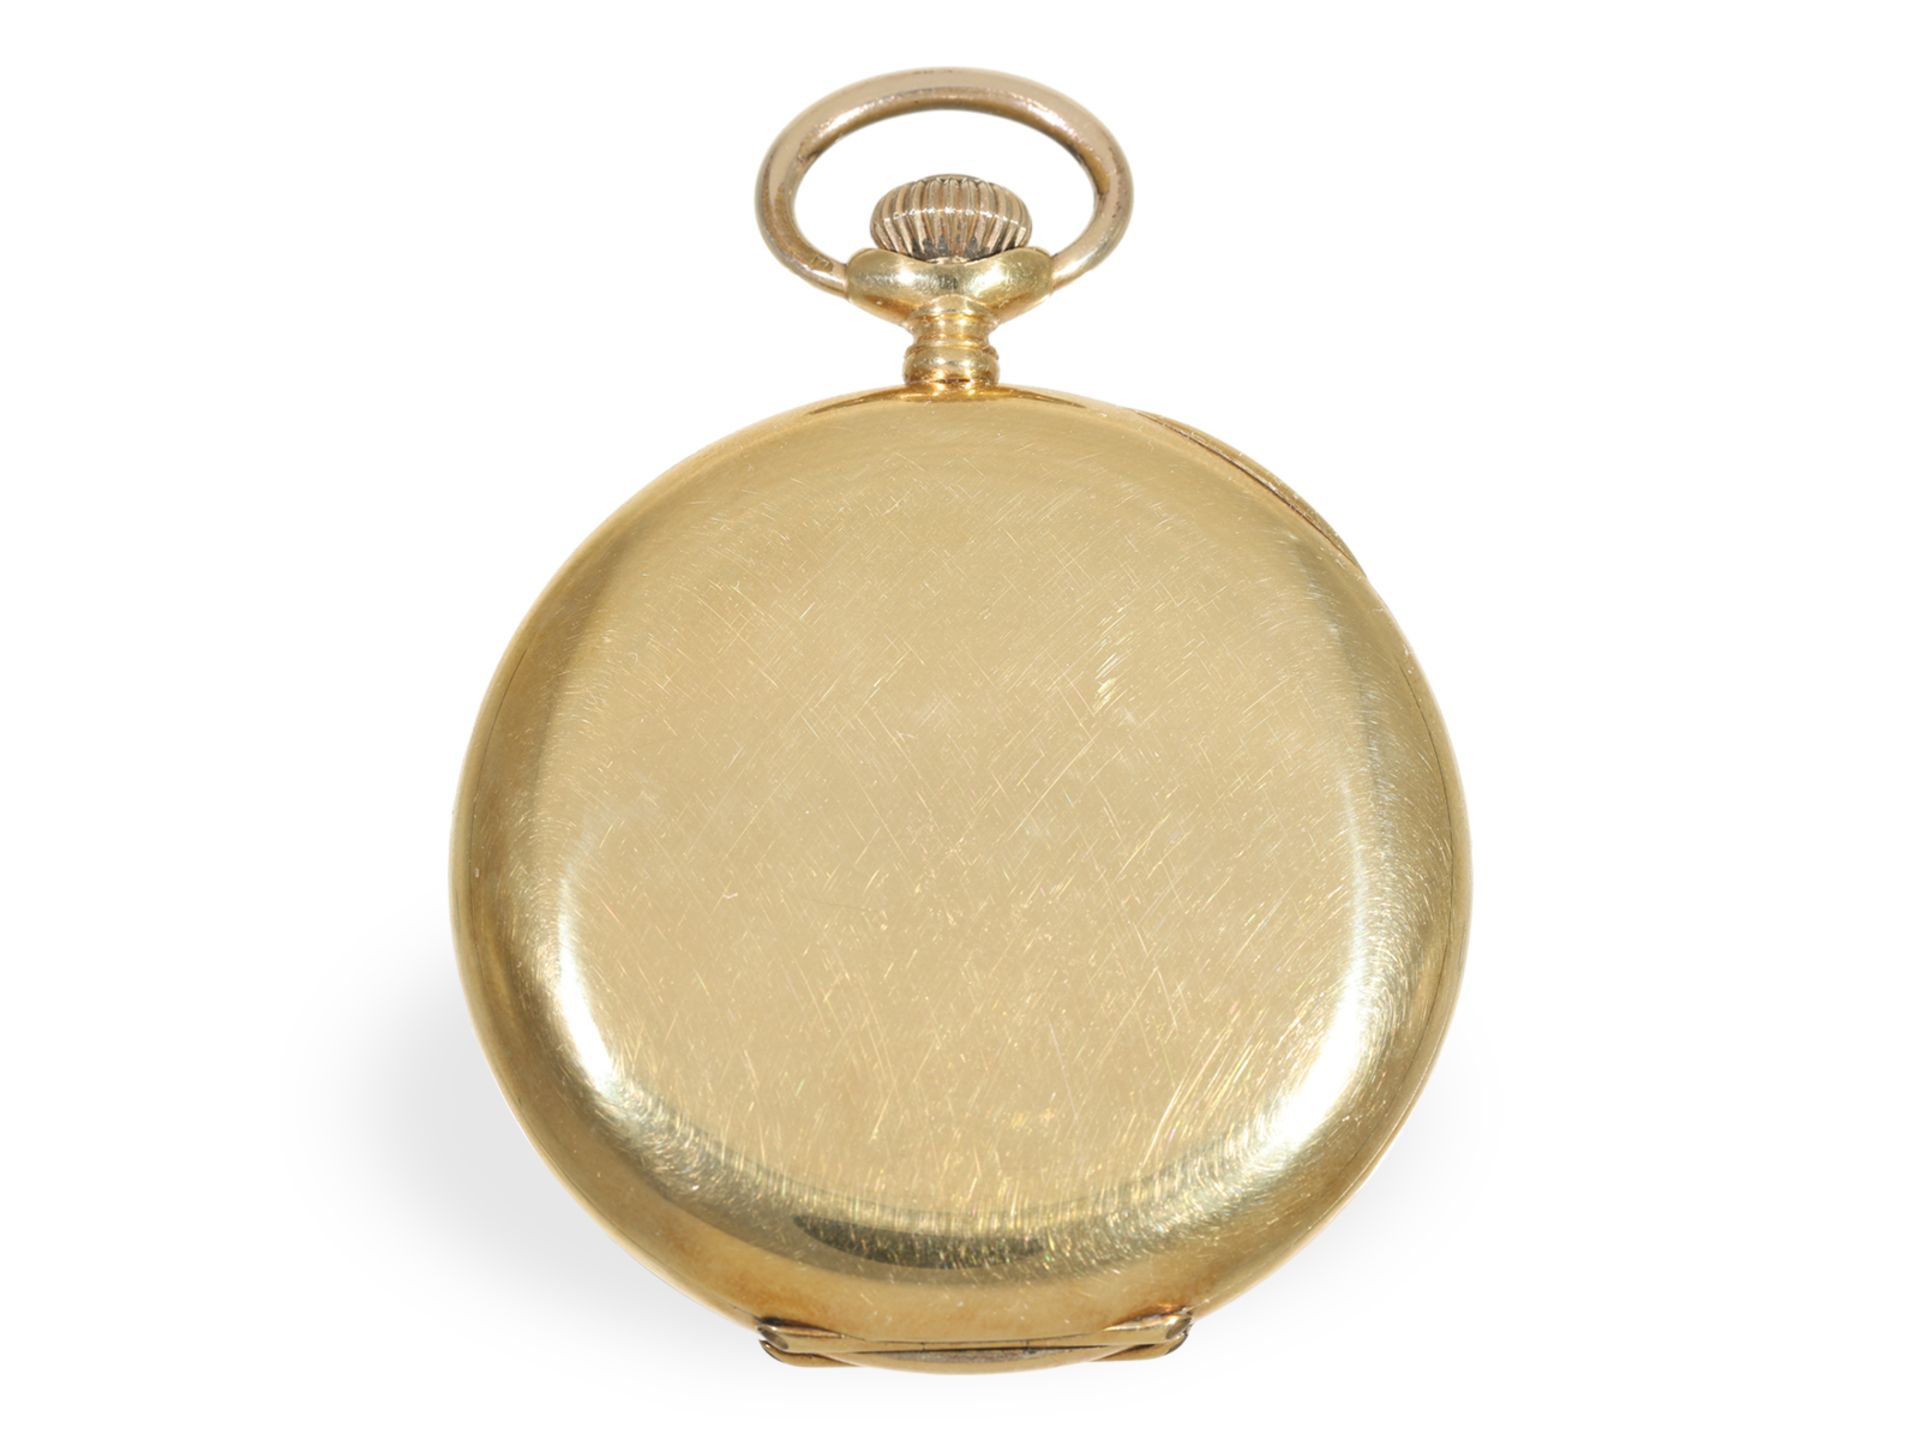 Pocket watch: fine gold hunting case watch with precision movement and gold watch chain, Record Watc - Image 6 of 8